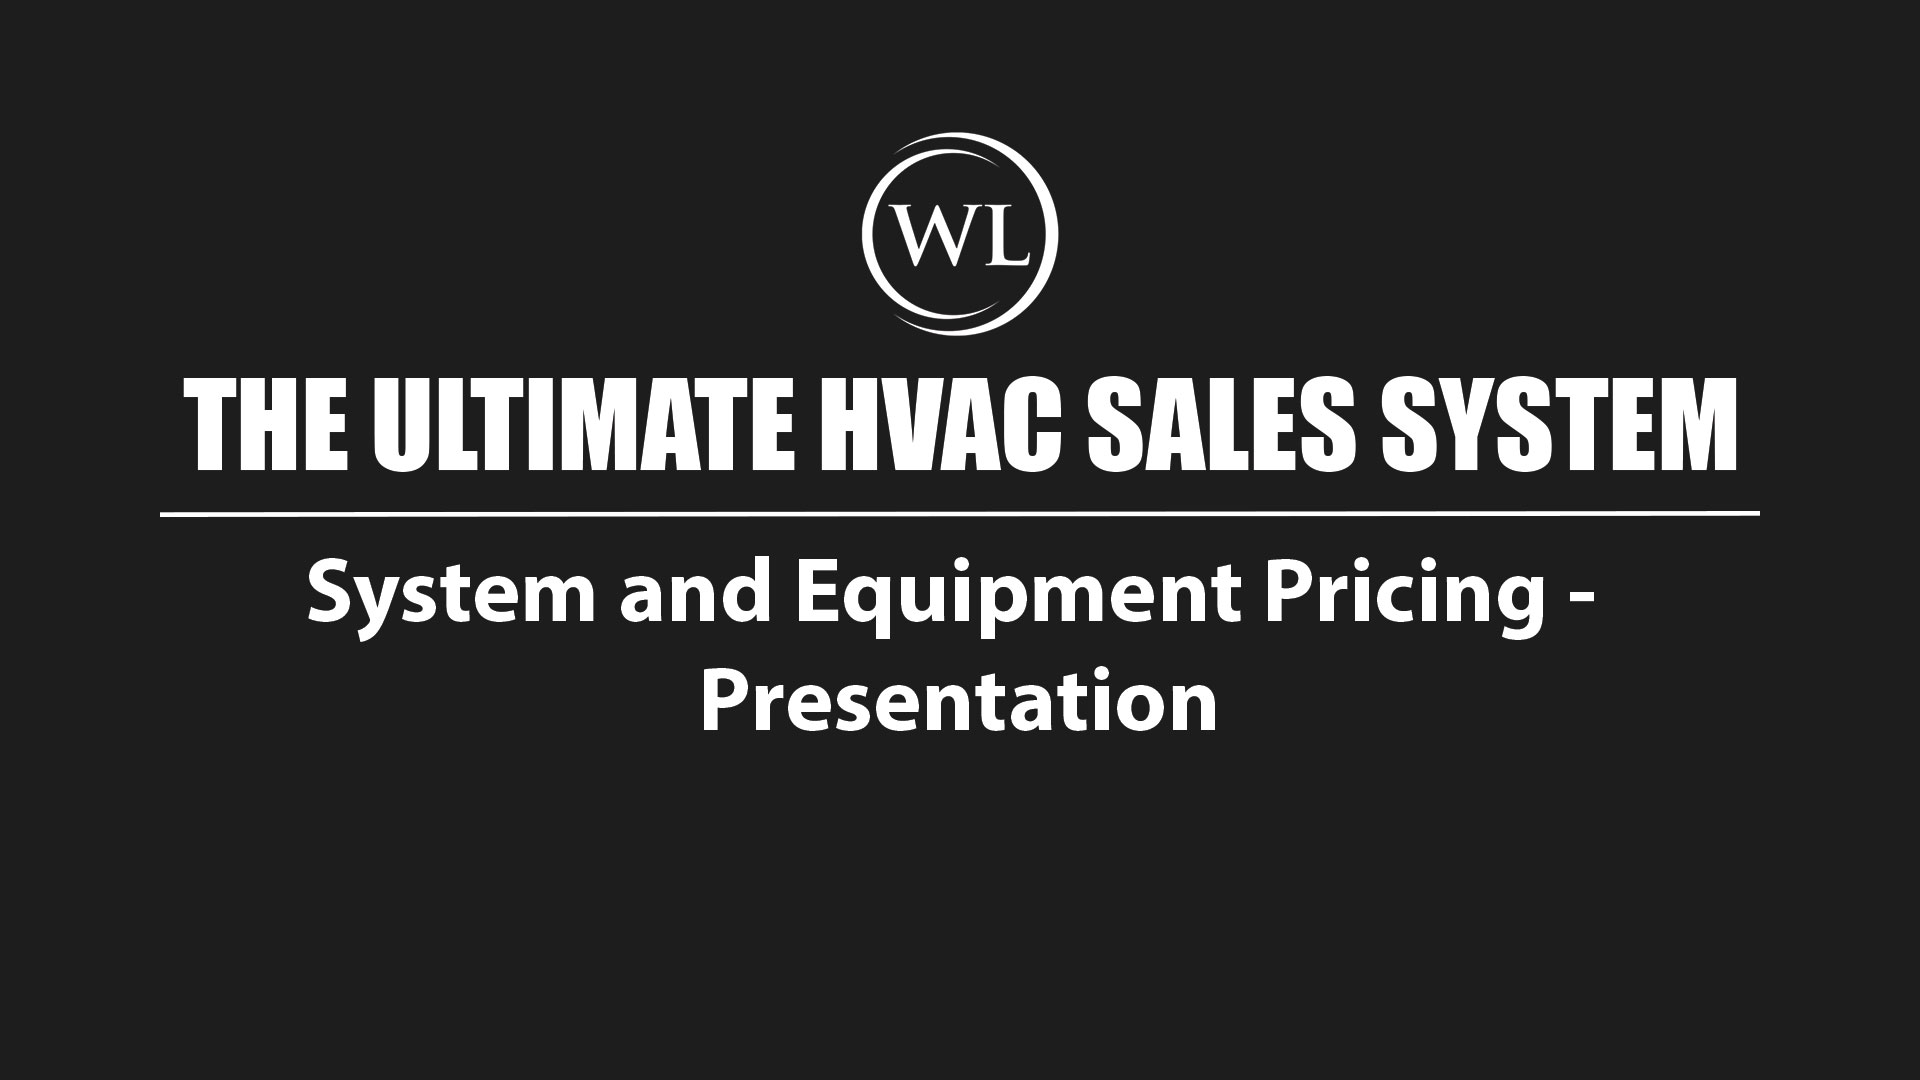 System and Equipment Pricing – Presentation